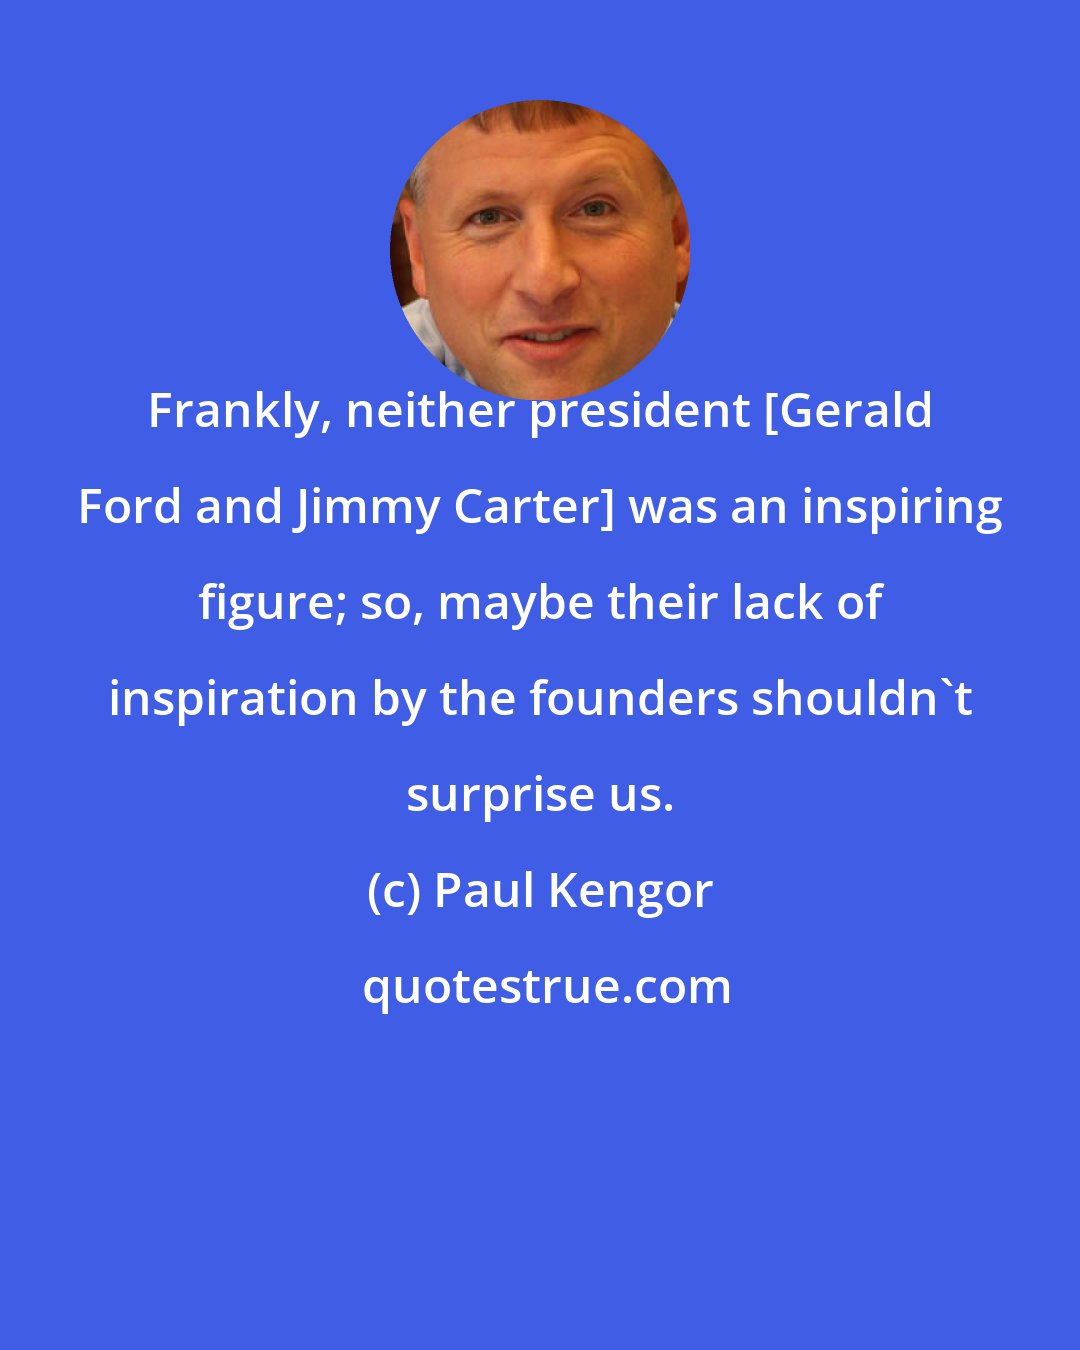 Paul Kengor: Frankly, neither president [Gerald Ford and Jimmy Carter] was an inspiring figure; so, maybe their lack of inspiration by the founders shouldn't surprise us.